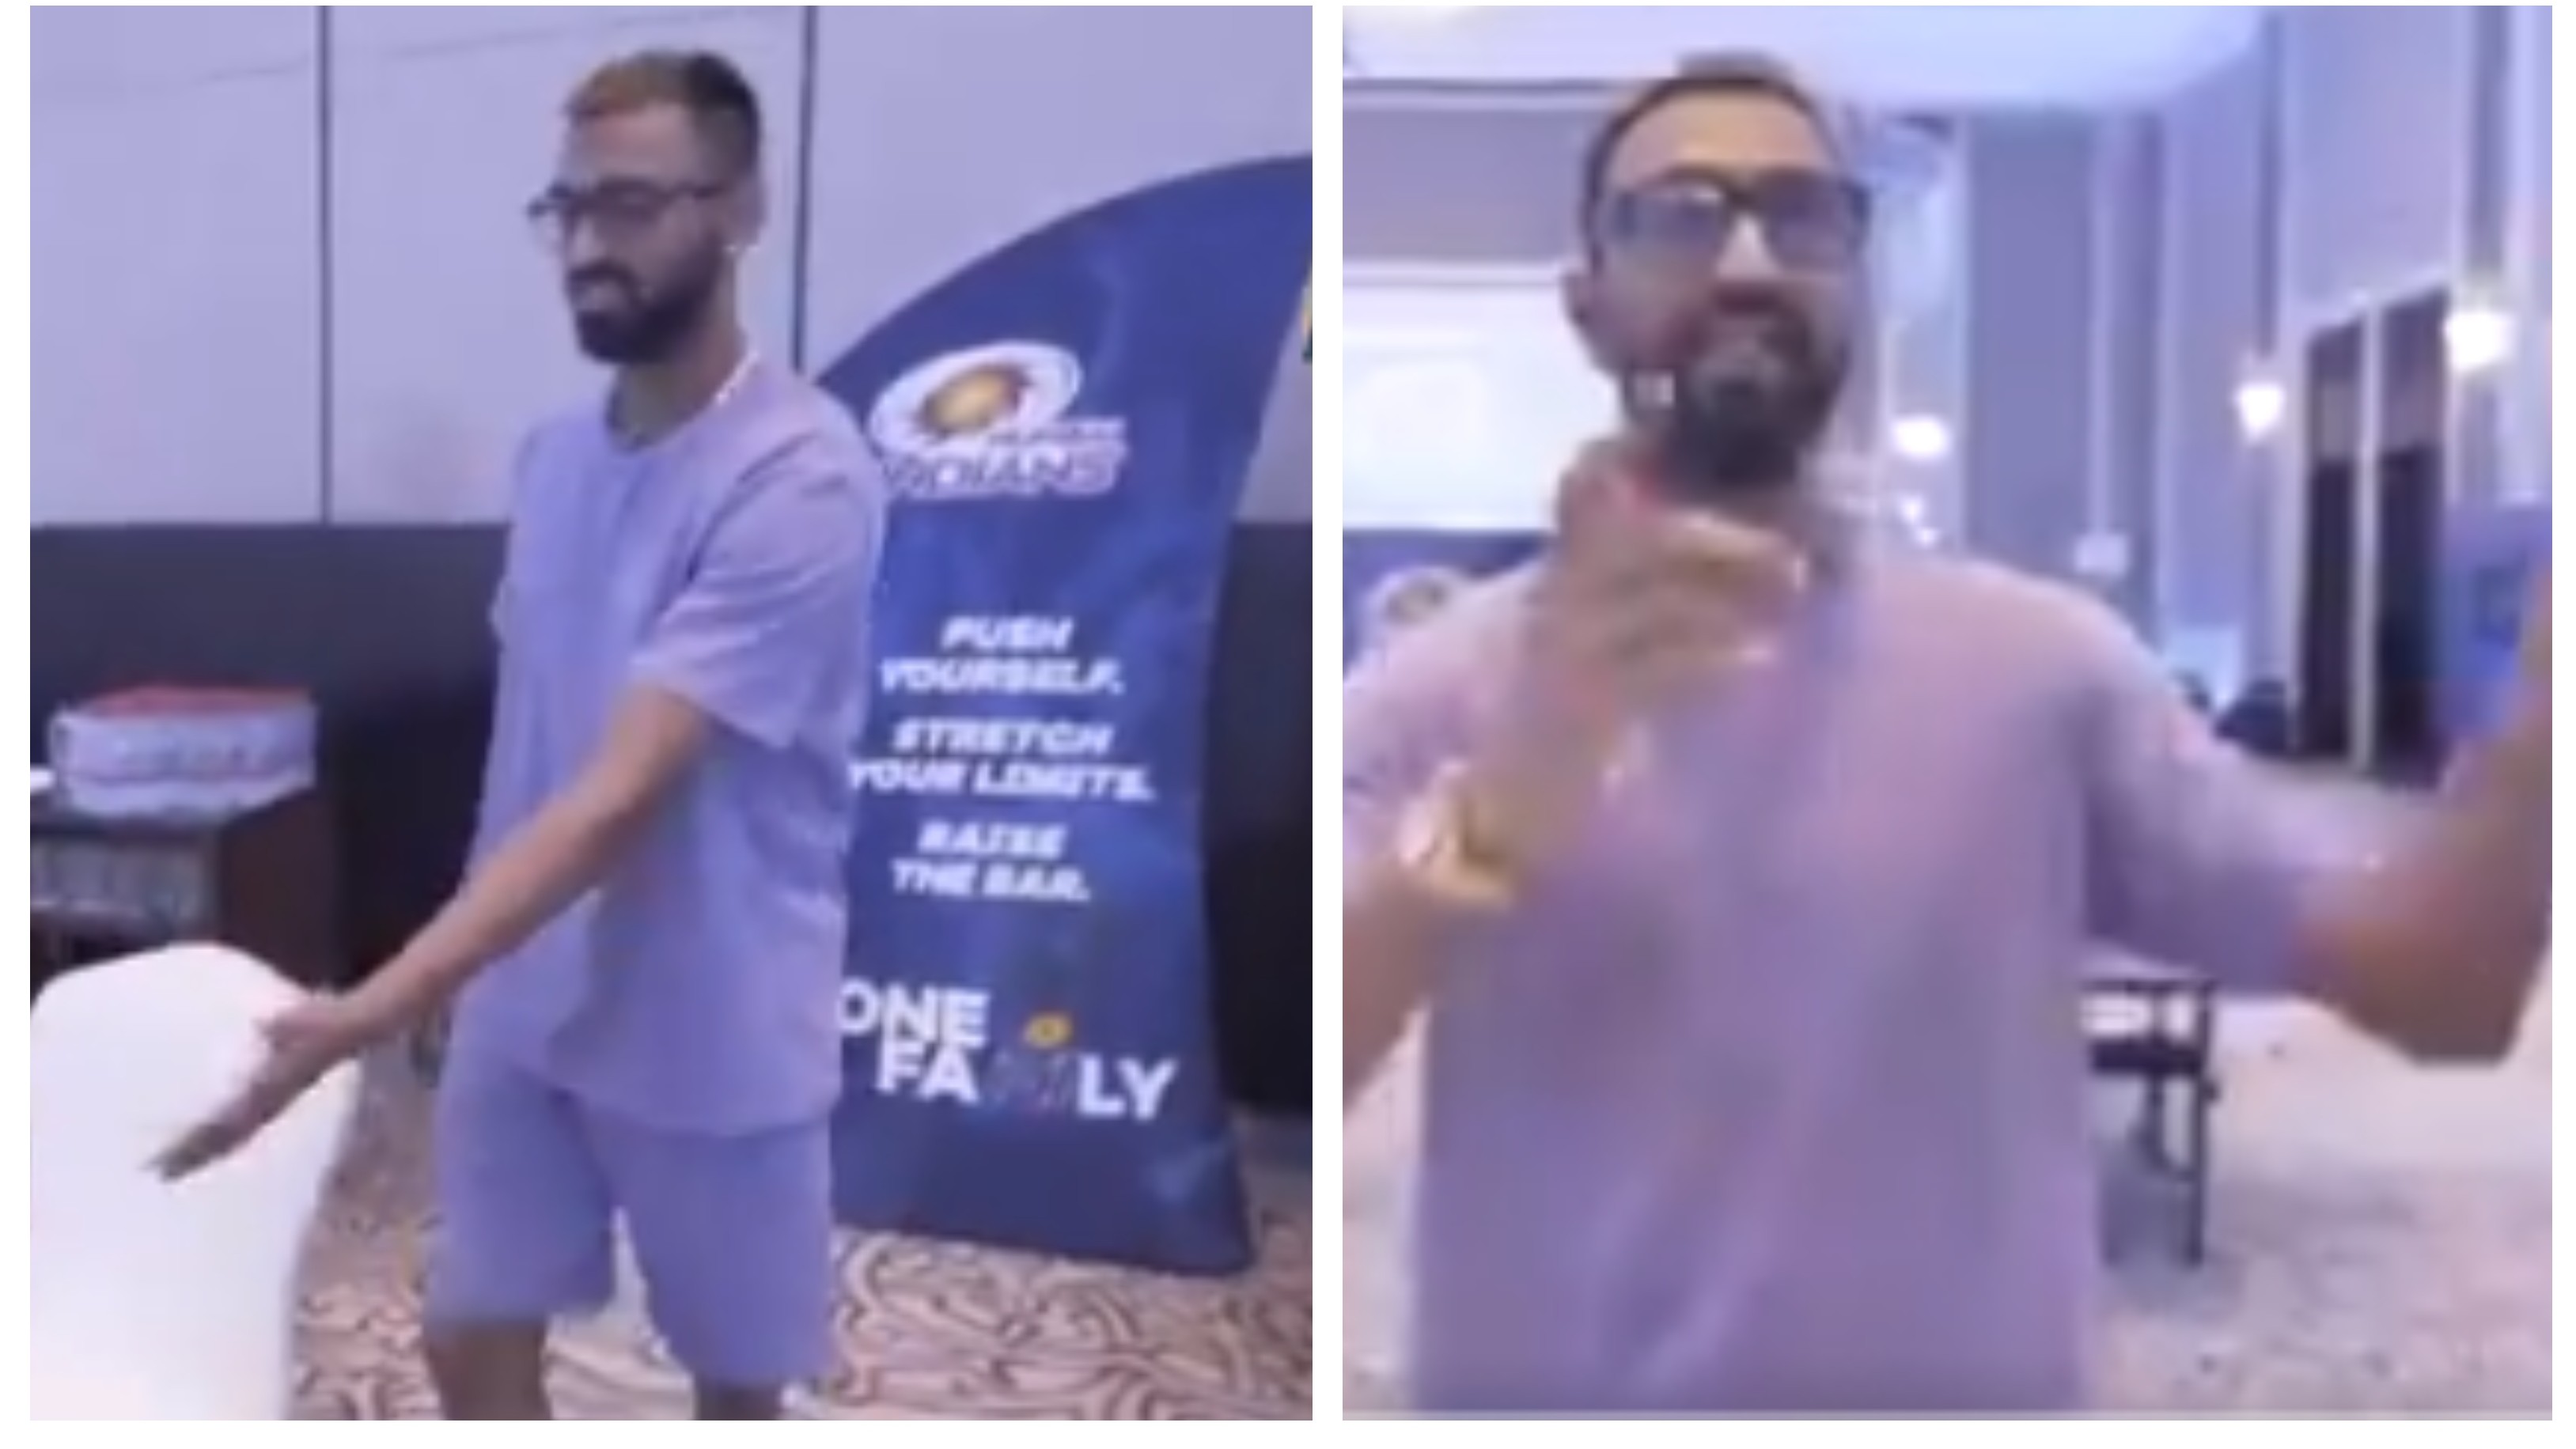 IPL 2020: WATCH – Krunal Pandya shows facilities provided by MI franchise in the team room